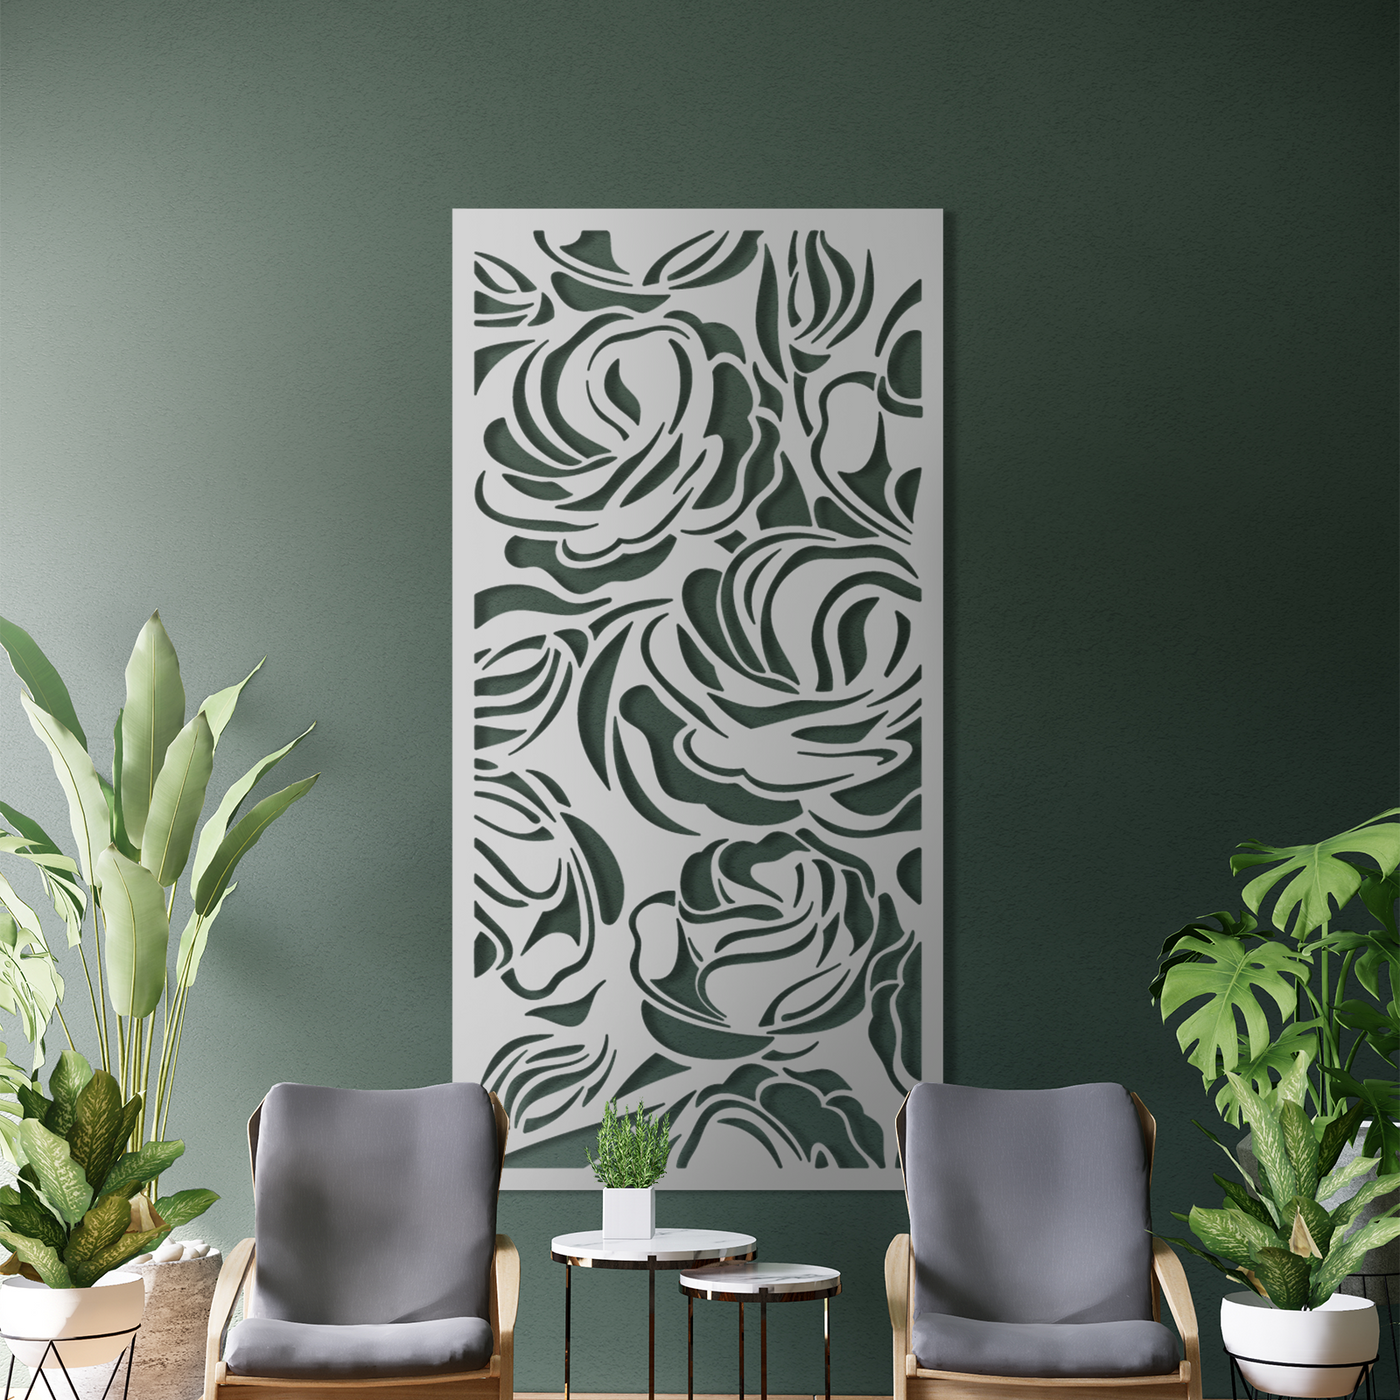 Roses Metal Garden Screen: Durable, Stylish, and Functional